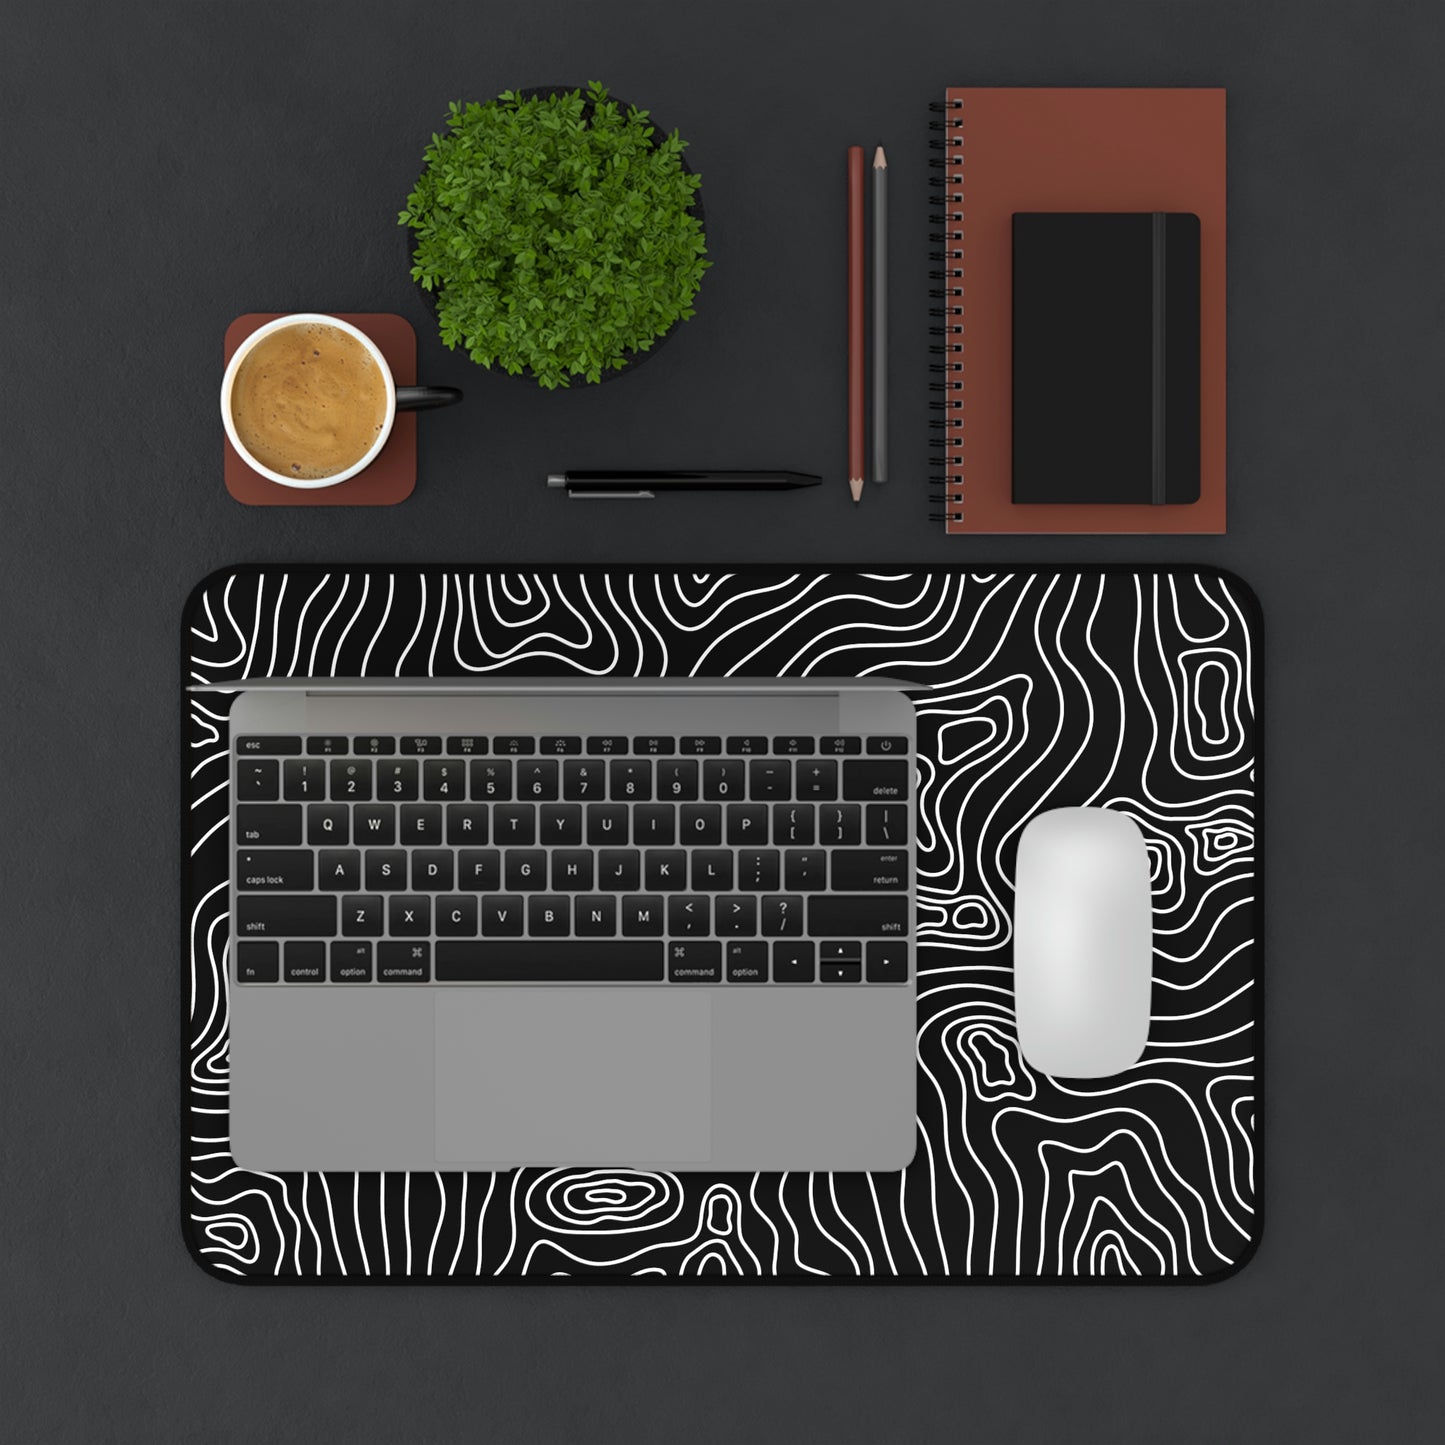 A 12" x 18" black desk mat with white topographic lines. A laptop and mouse sit on top of it.